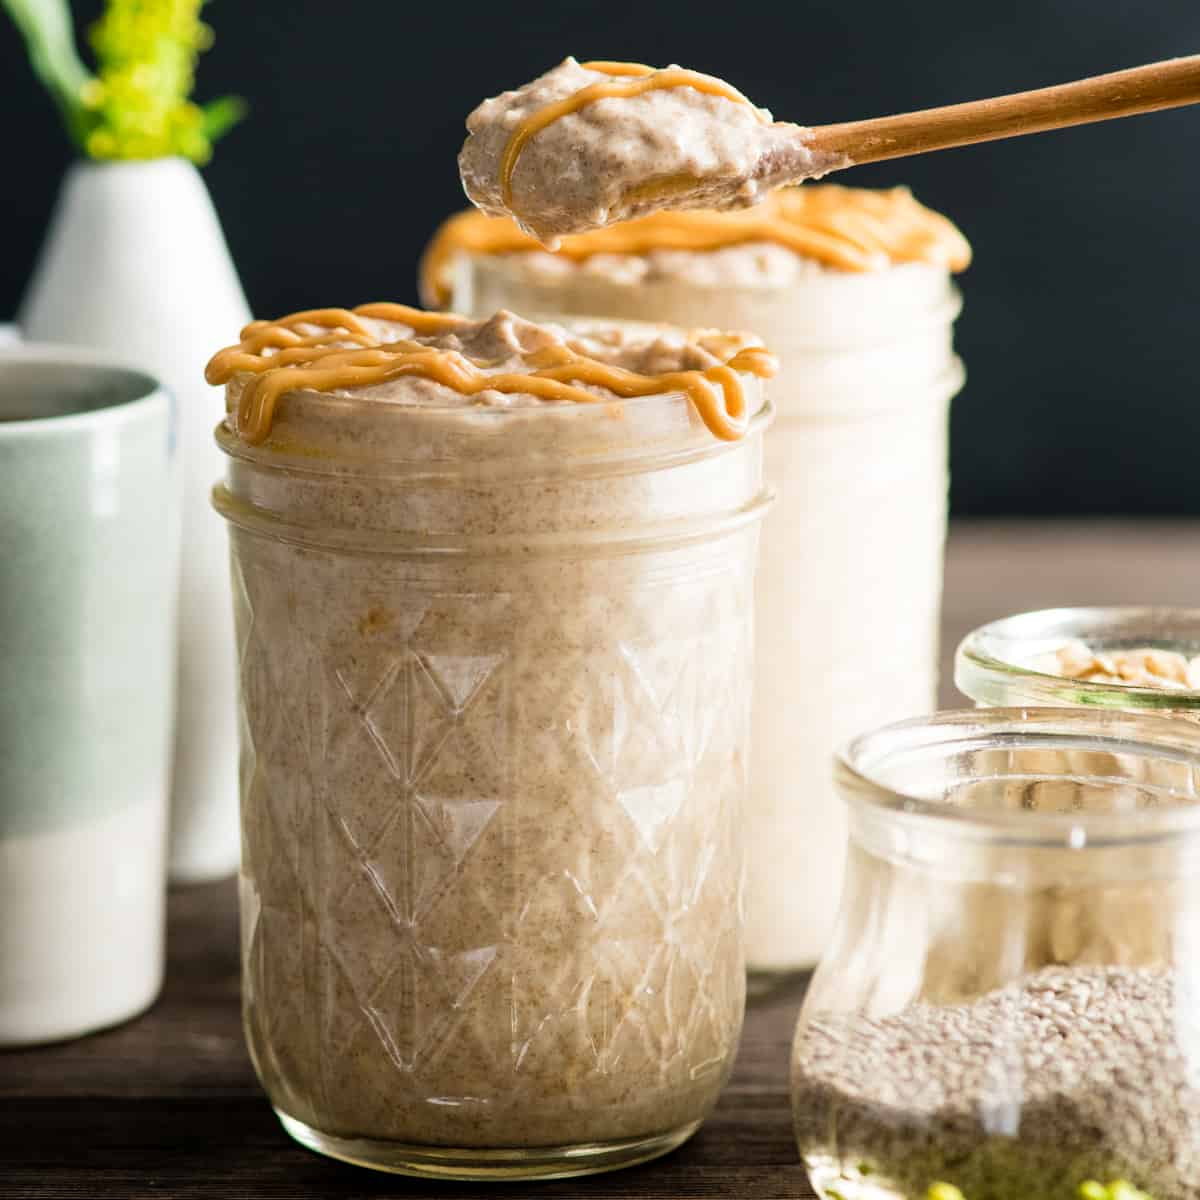 a spoon taking a bite out of a jar of Peanut Butter Overnight Oats